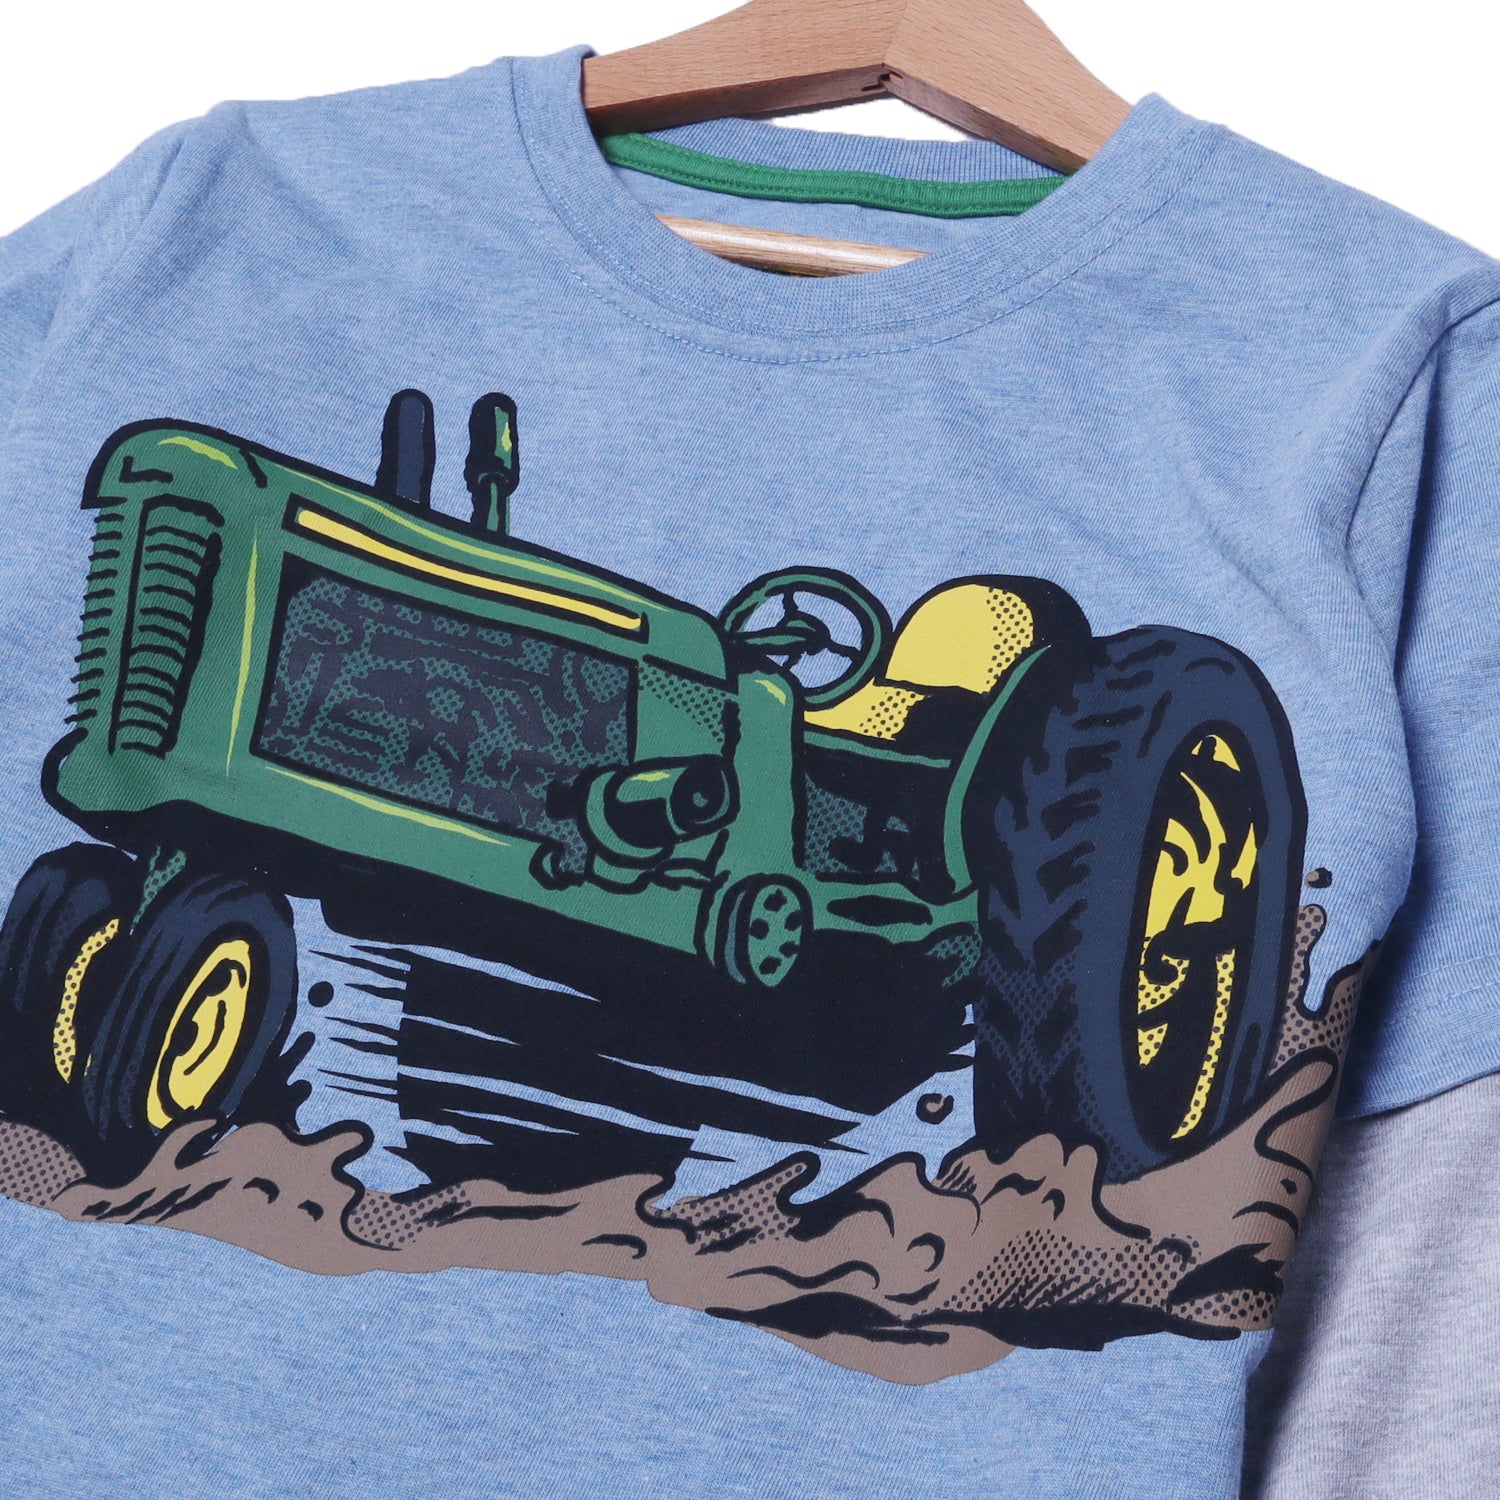 BLUE WITH GREY SLEEVES "TRACTOR" PRINTED FULL SLEEVES T-SHIRT